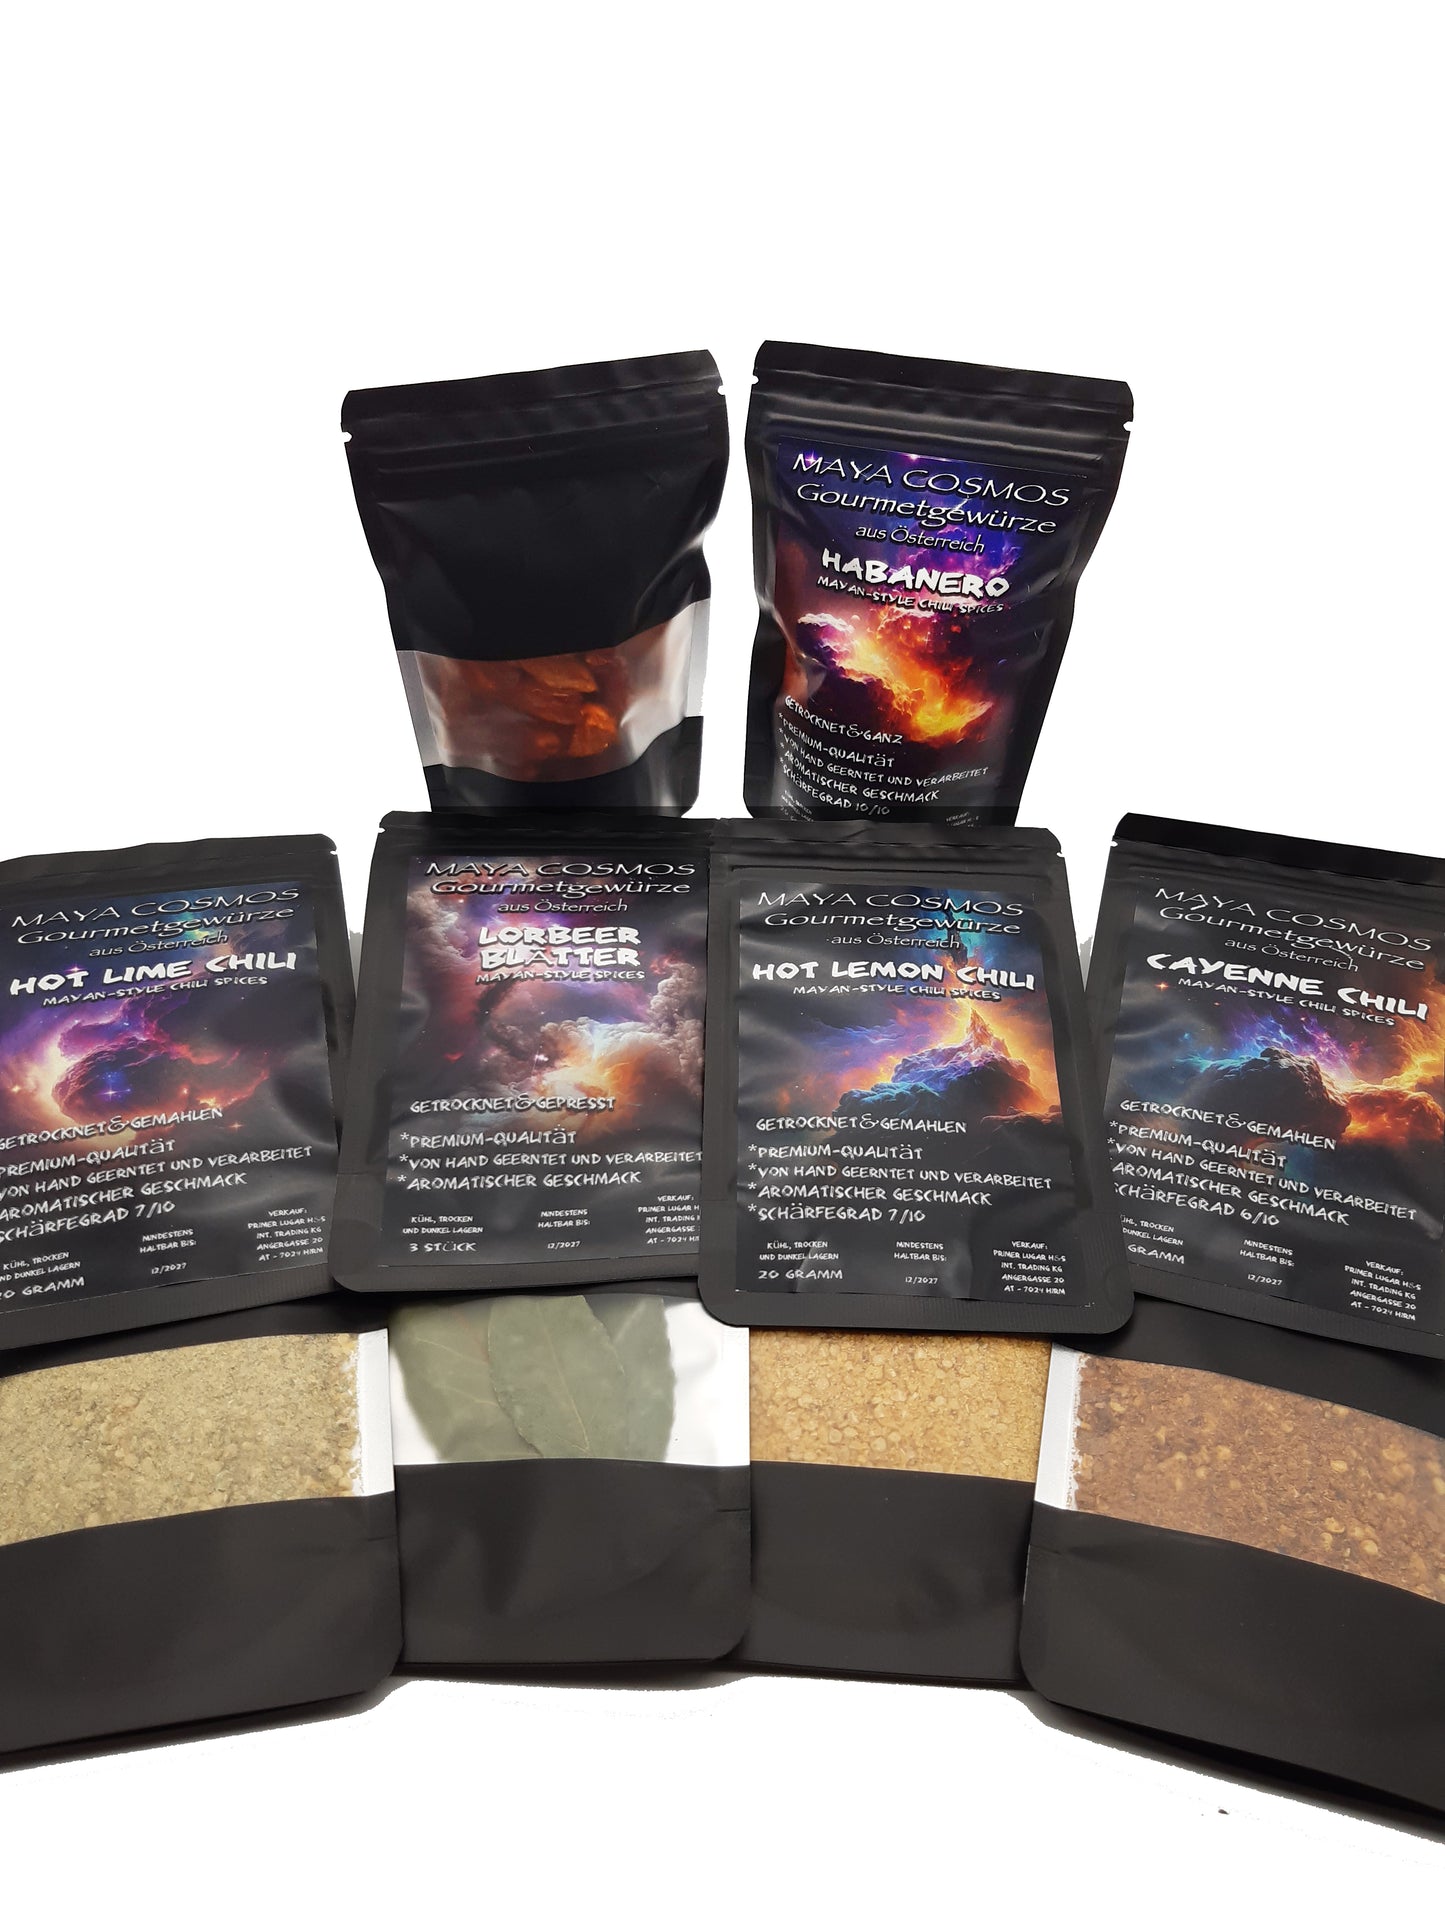 Maya Cosmos Spice Pack (about 83g) - Habanero, Cayenne, Hot Lime, Hot Lemon, Bay Leaves